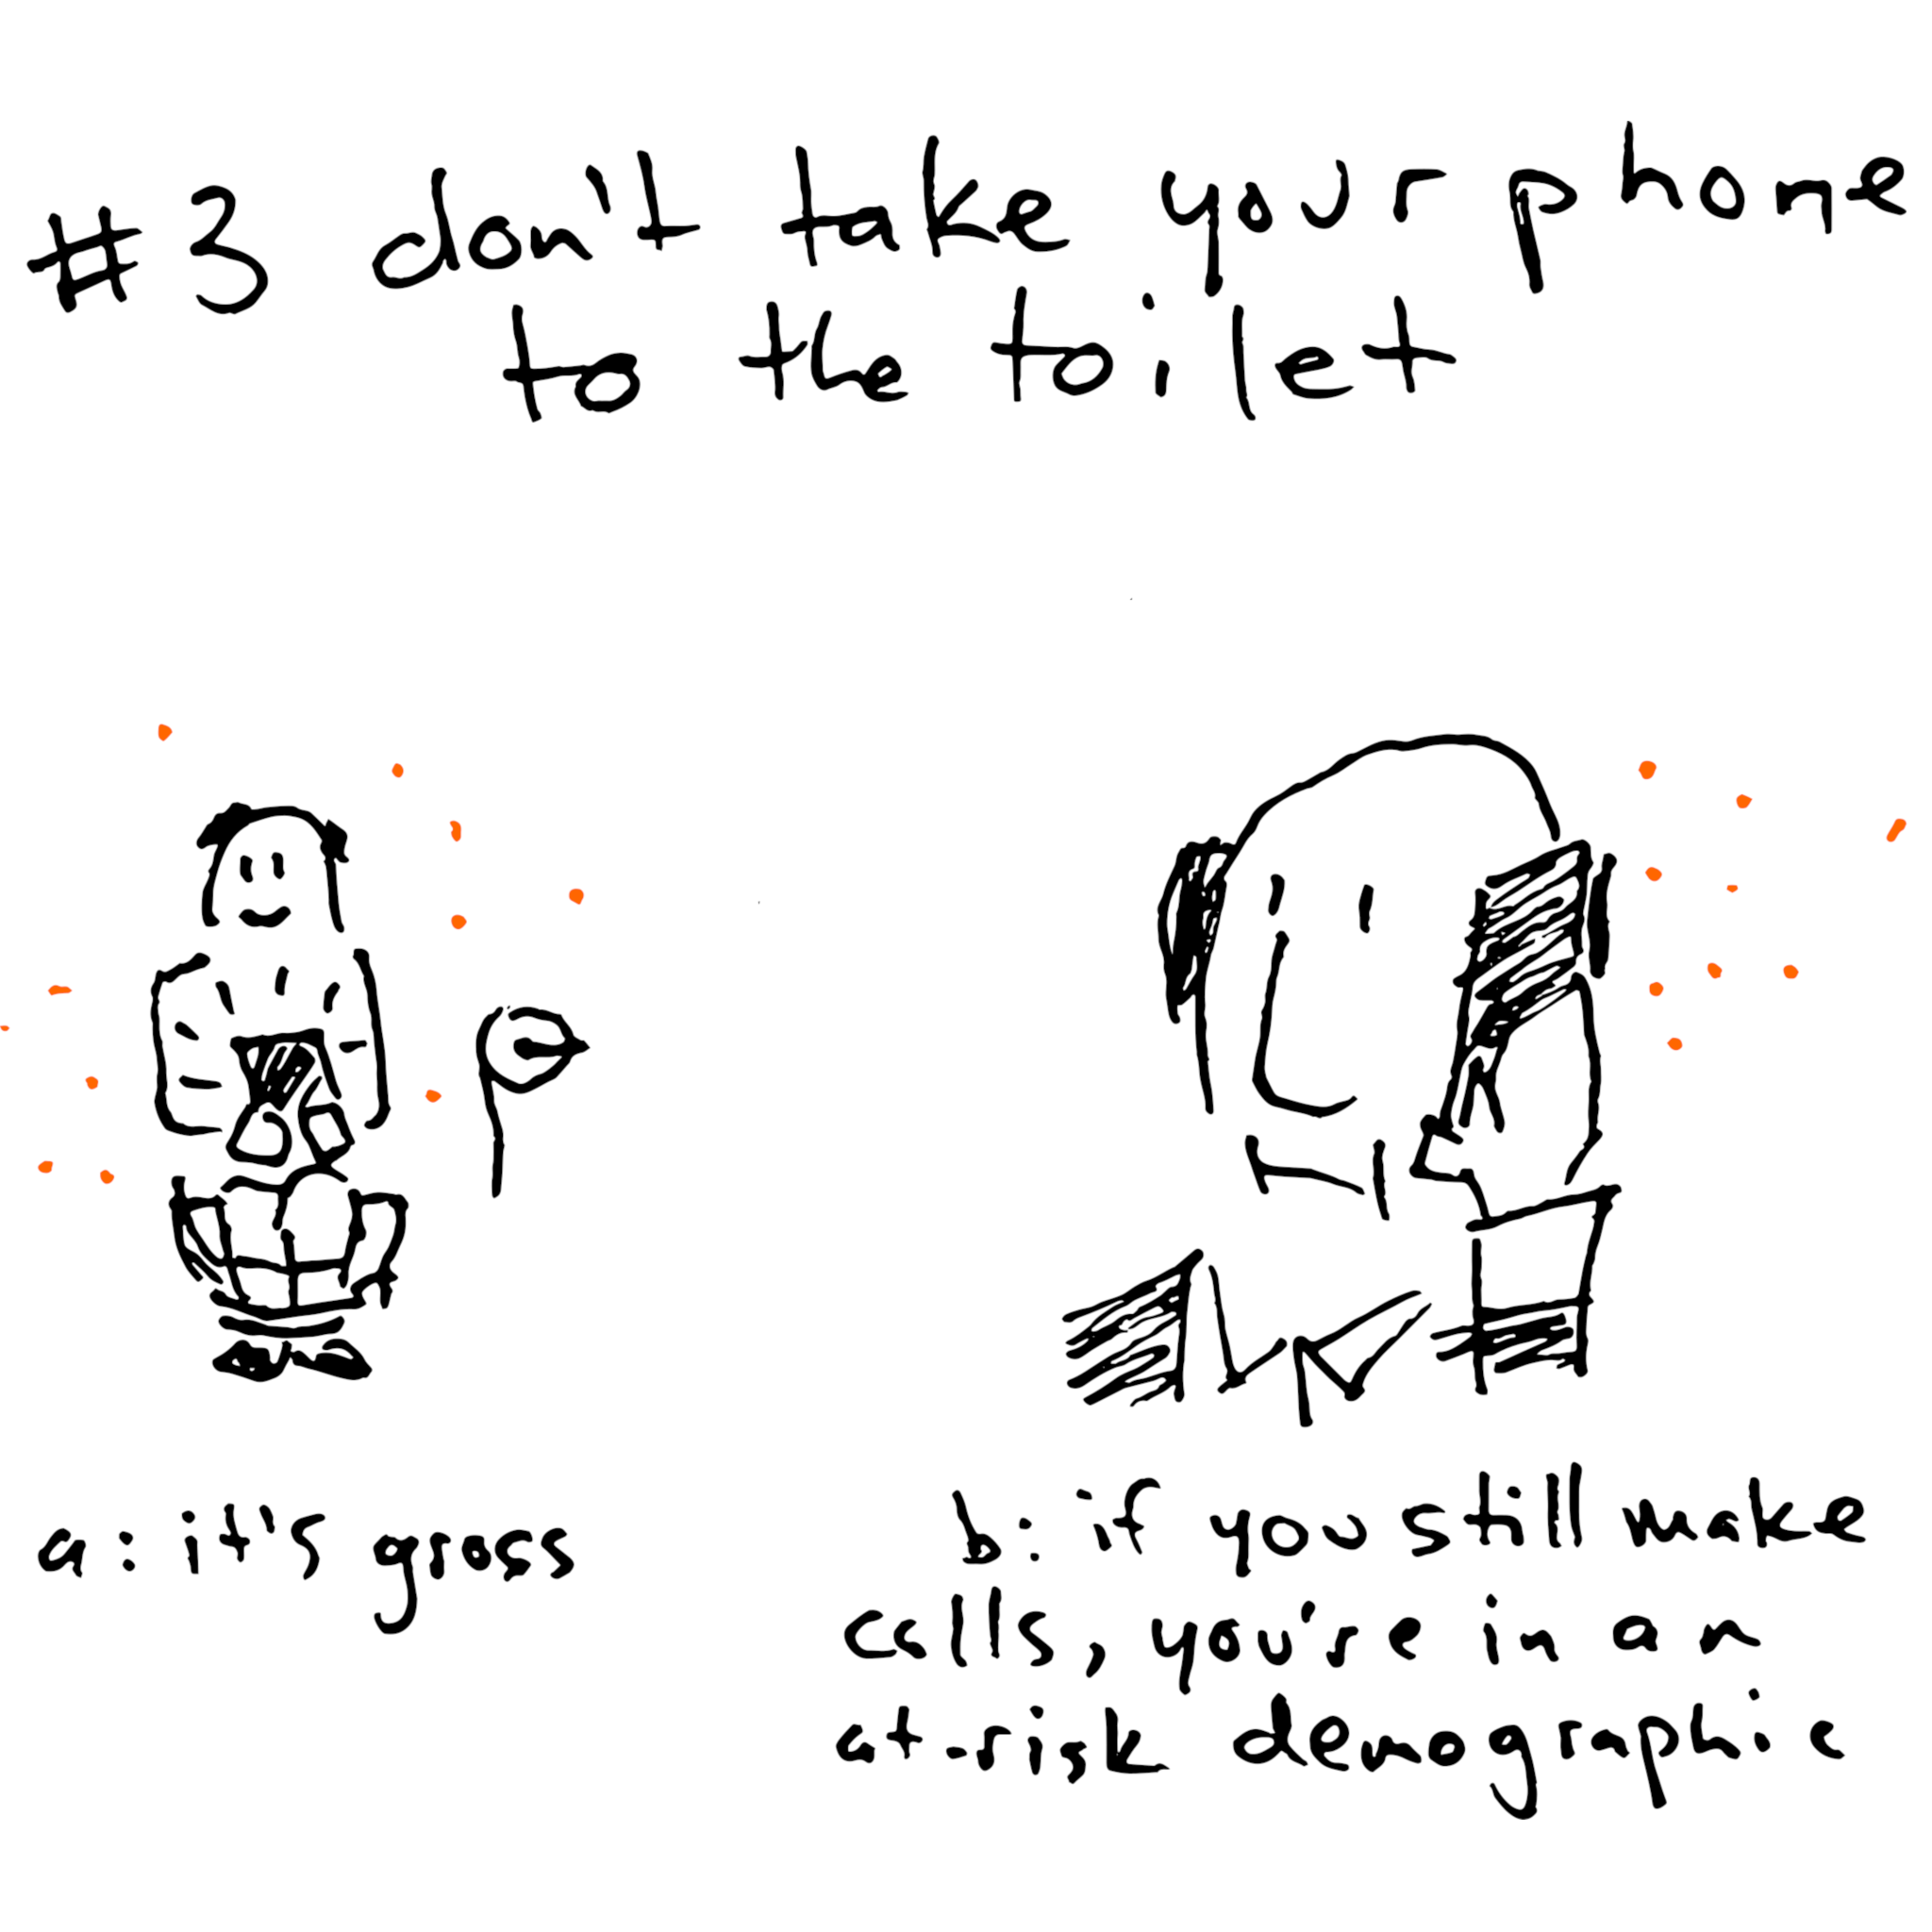 #3 don't take your phone to the toilet - (a) it's gross (b) if you still make calls, you're in an at-risk demographic. A middle-aged man reading his smartphone while seated on the toilet, and then making a call.